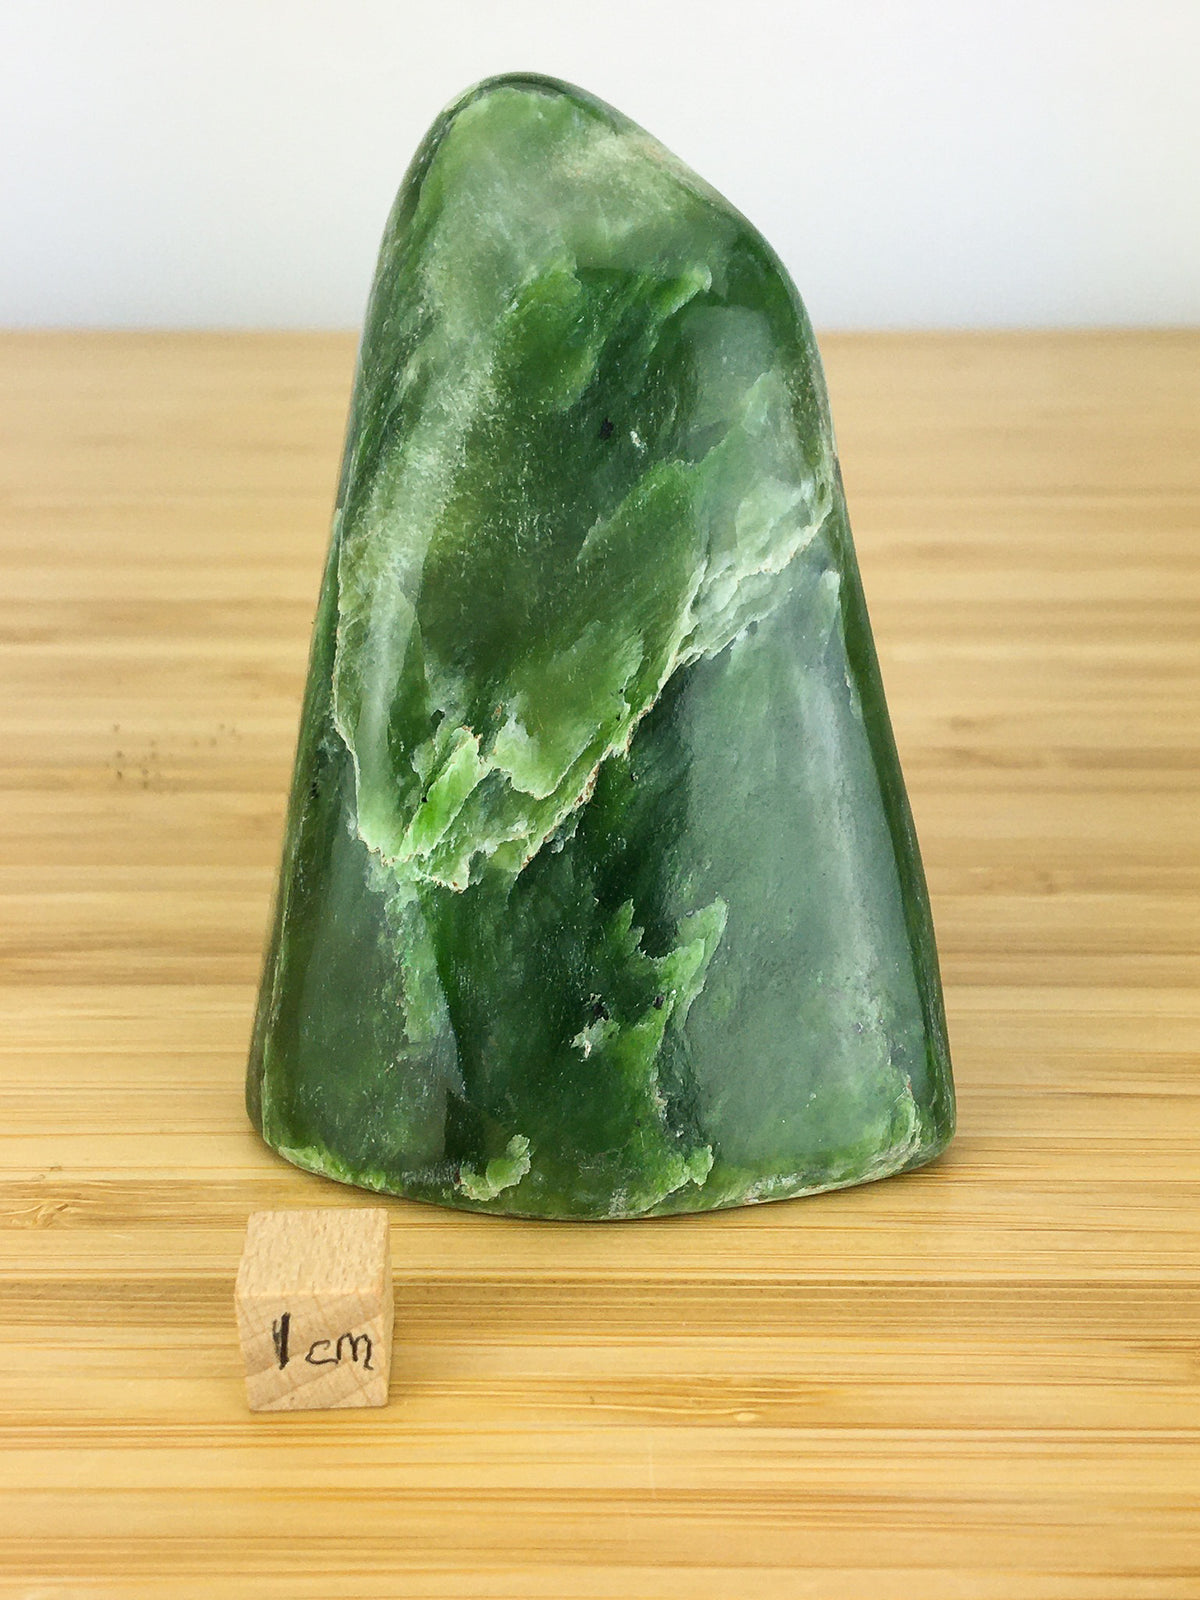 nephrite jade freeform. It is a vivid green and has streaks of white actinolite and talc. It is shown next to a 1cm cube for scale, It is about 6cm wide and 8cm high